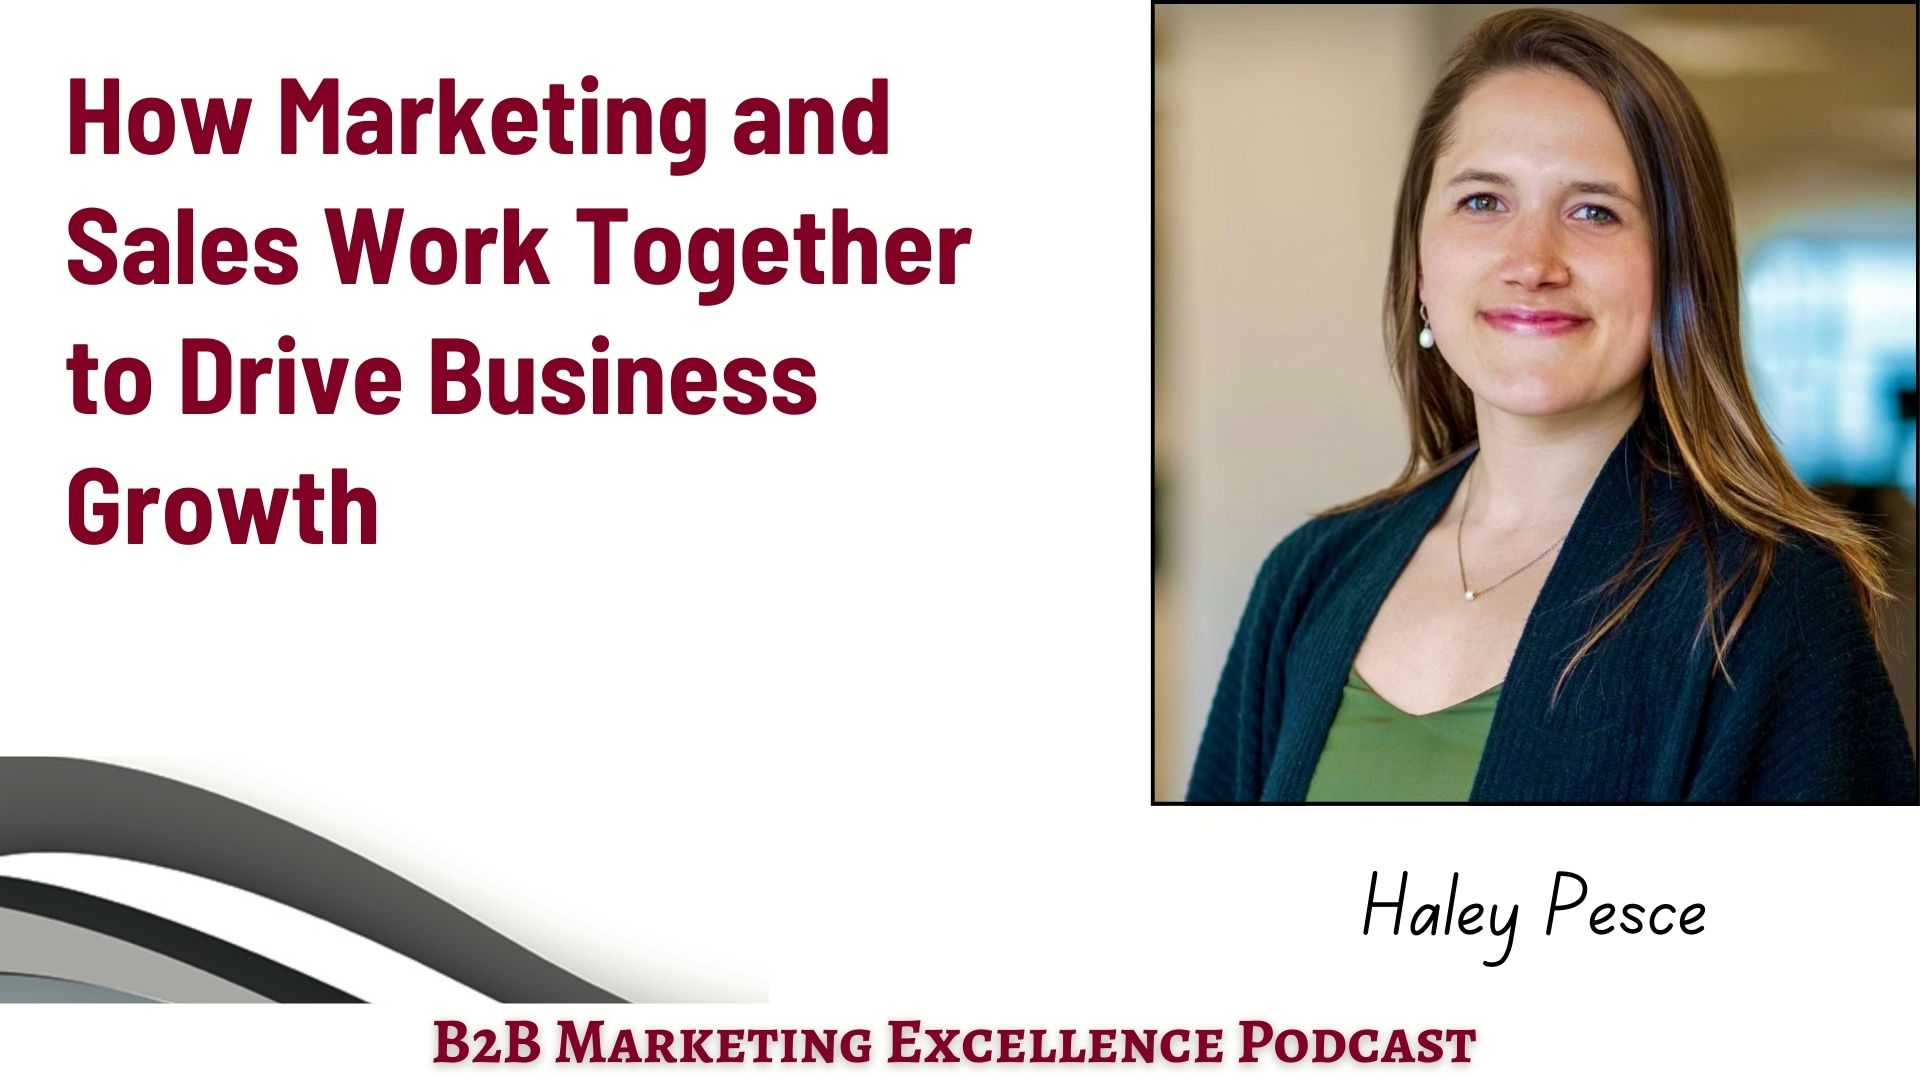 Podcast – How Marketing and Sales Work Together to Drive Business Growth